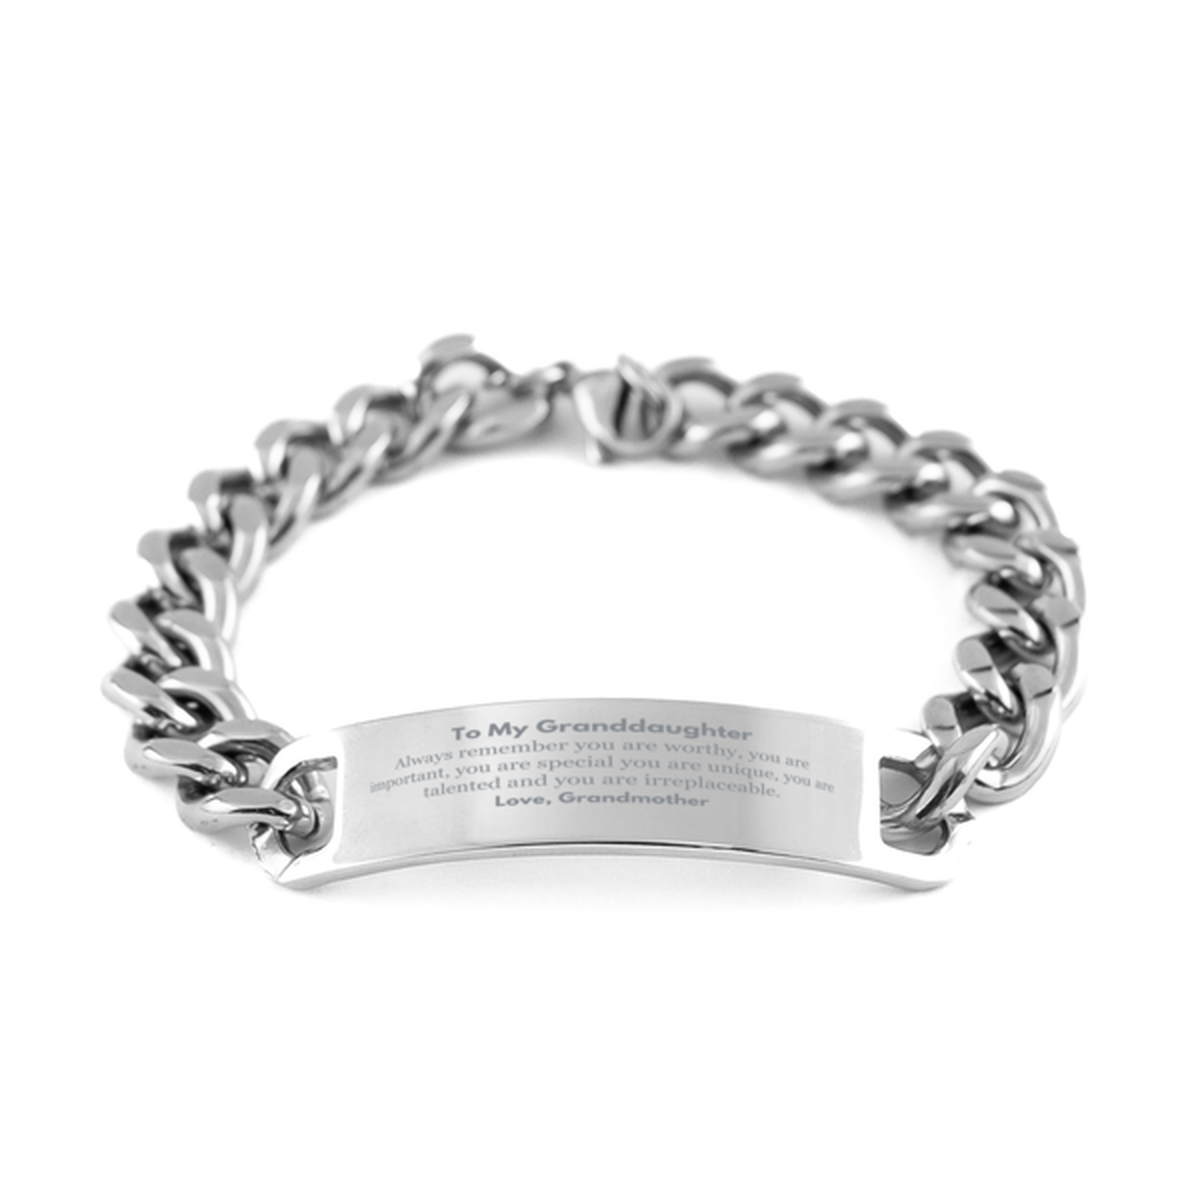 Granddaughter Birthday Gifts from Grandmother, Inspirational Cuban Chain Stainless Steel Bracelet for Granddaughter Christmas Graduation Gifts for Granddaughter Always remember you are worthy, you are important. Love, Grandmother